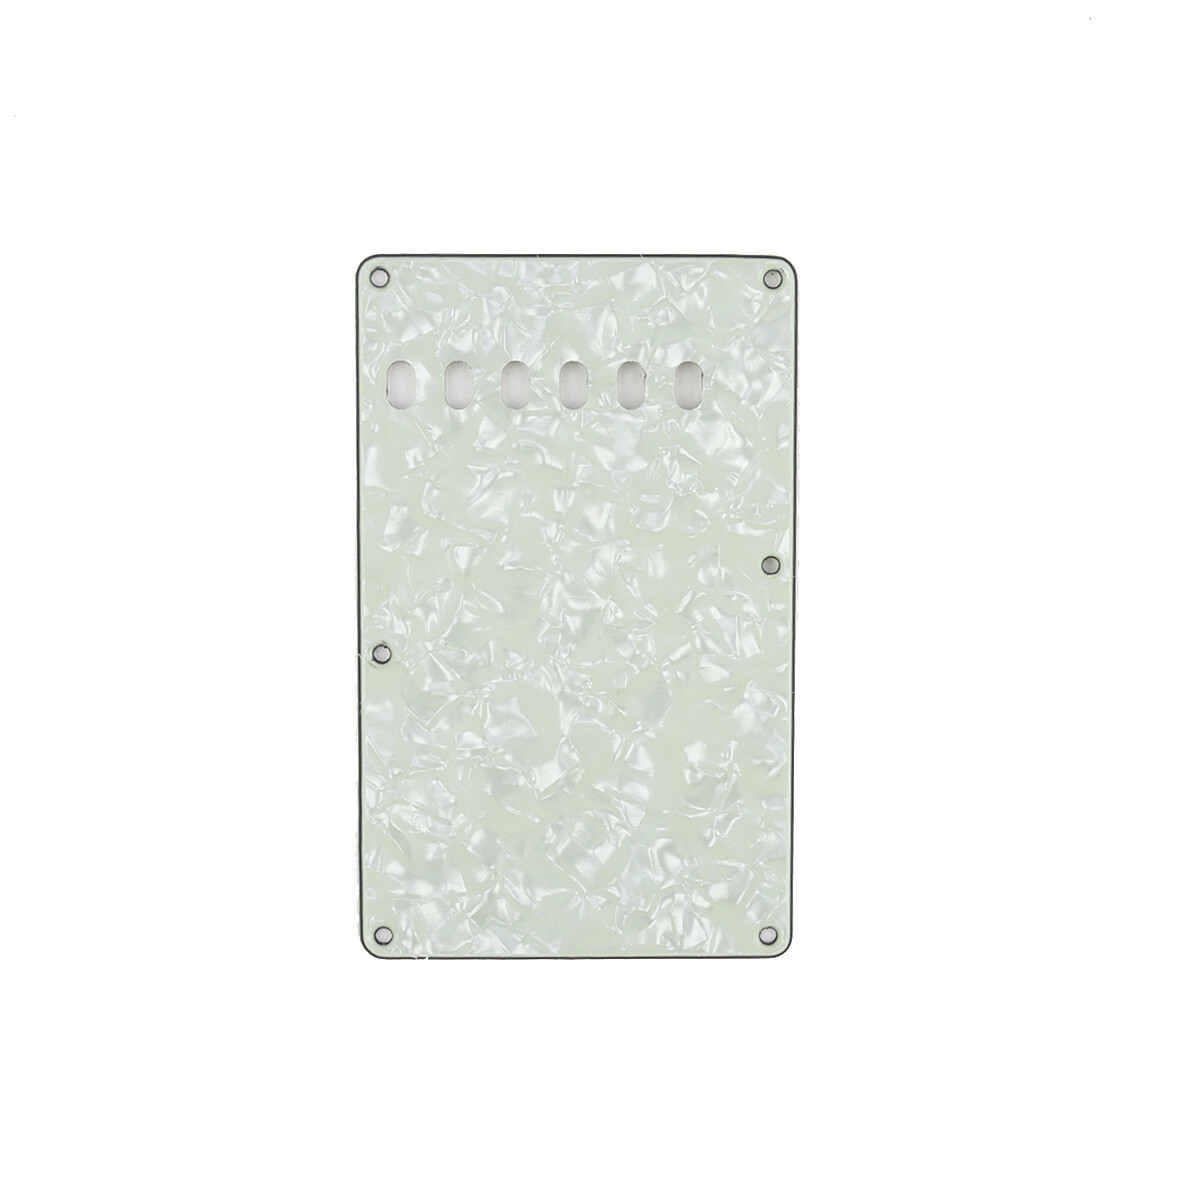 Brio Pearl Mint Green Vintage Style Back Plate Tremolo Cover 4 ply - US/Mexican Fender®Strat® Fit